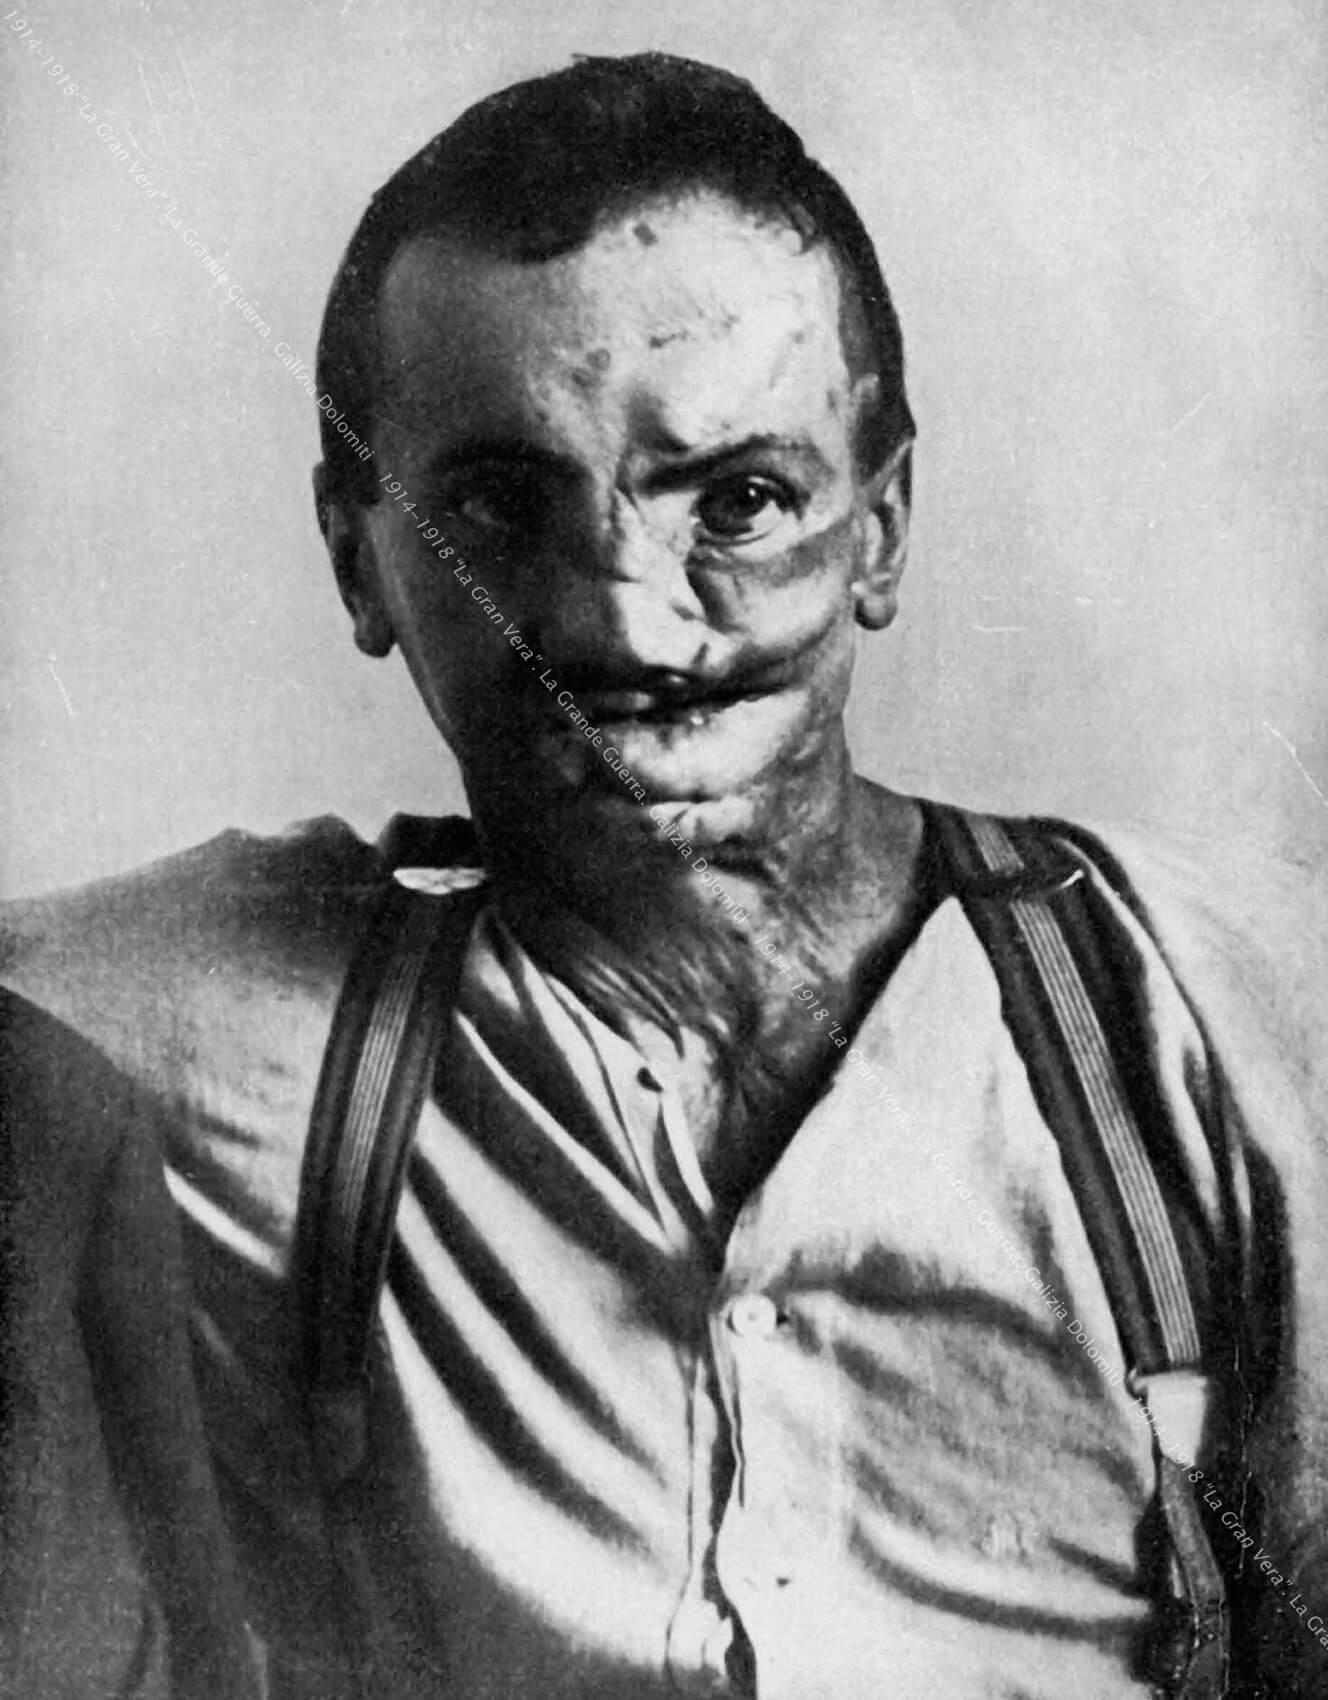 A 25-year-old peasant, wounded by grenade shards in 1916